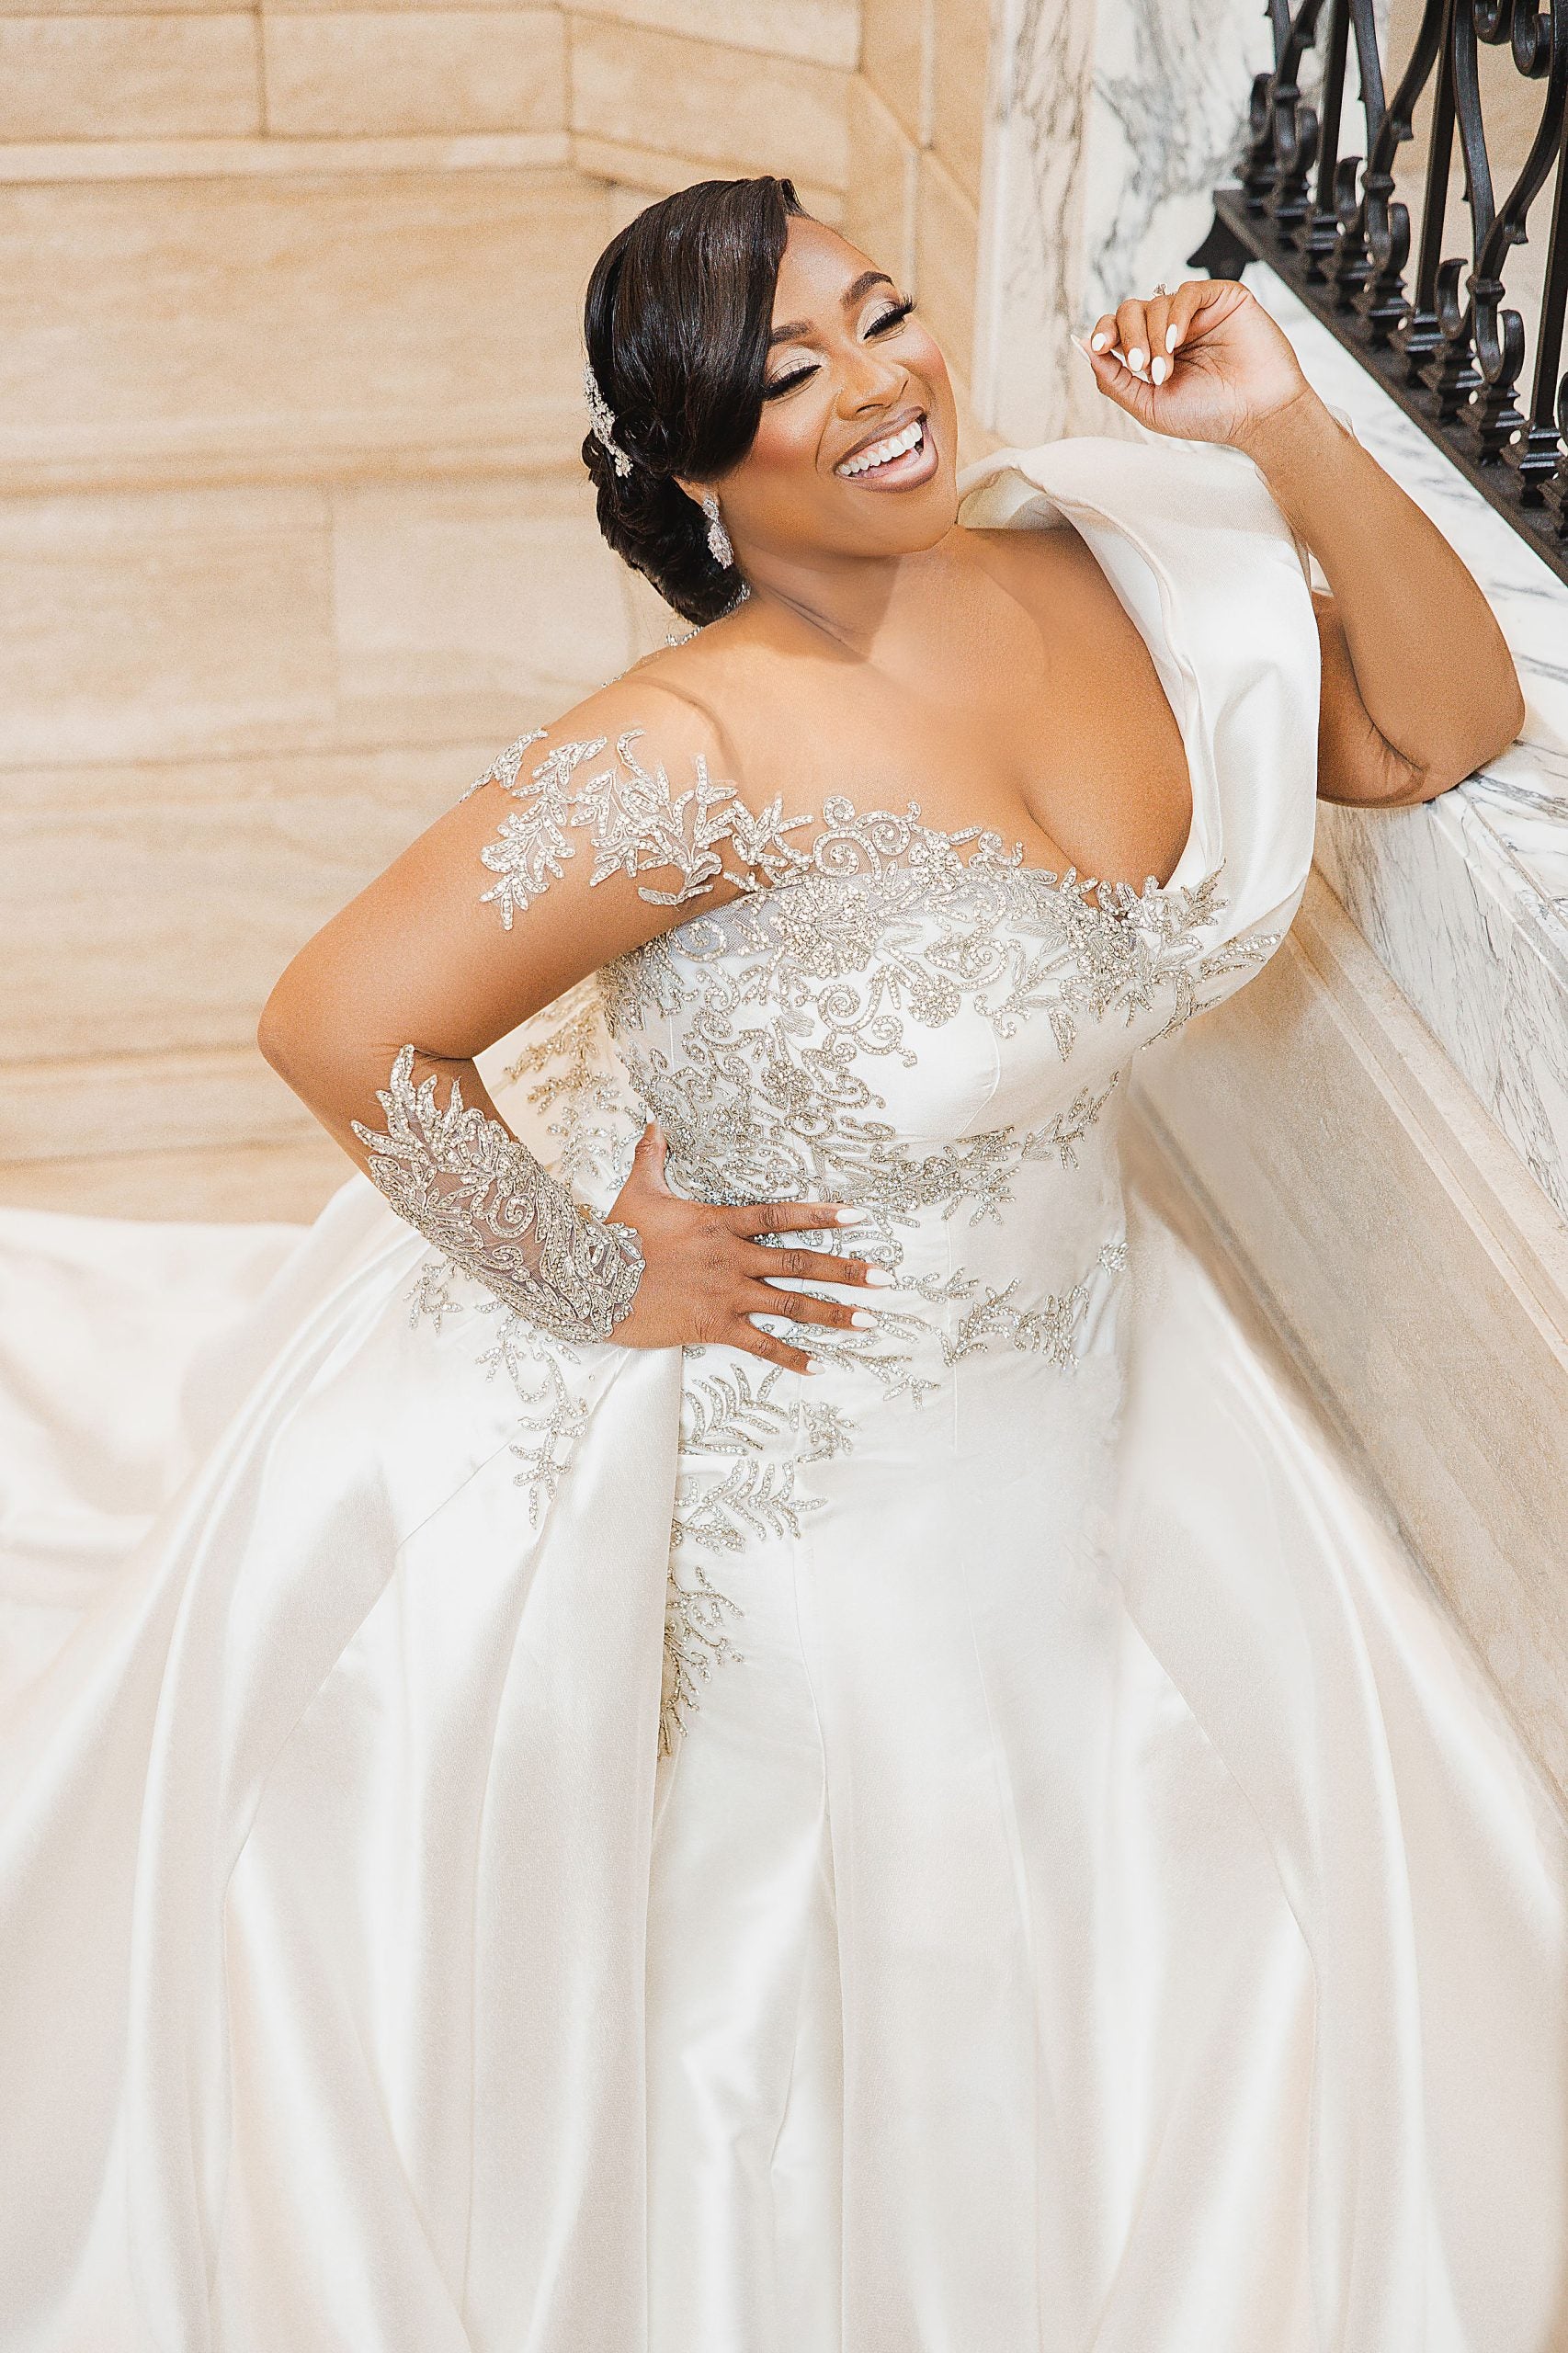 Exclusive: Kierra Sheard, Jordan Kelly Celebrated One-Year Anniversary With Gorgeous Wedding They Always Wanted